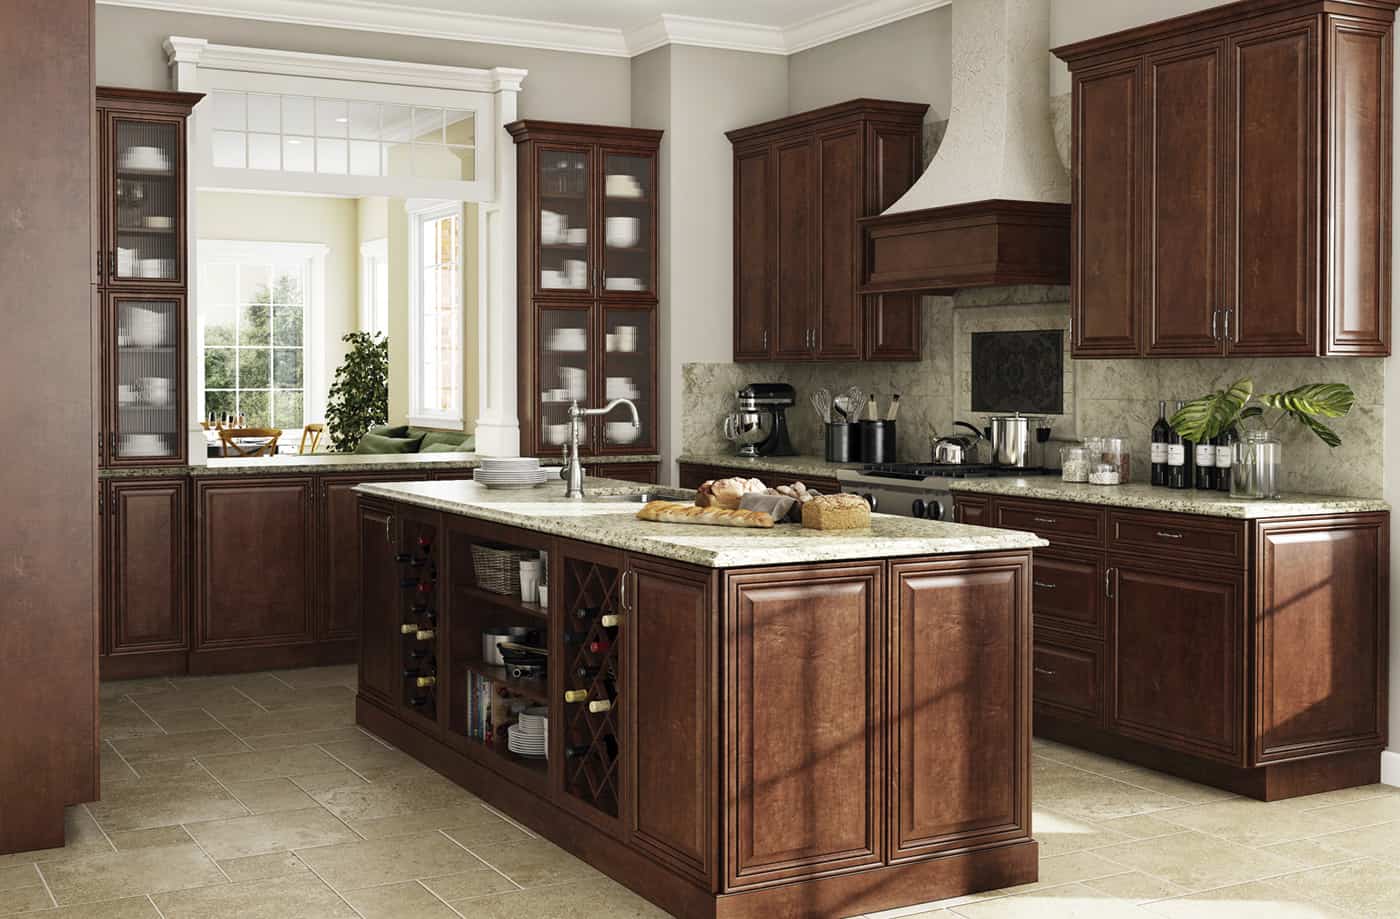 American Woodmark Spends 1B For Cabinet Maker RSI Home Products